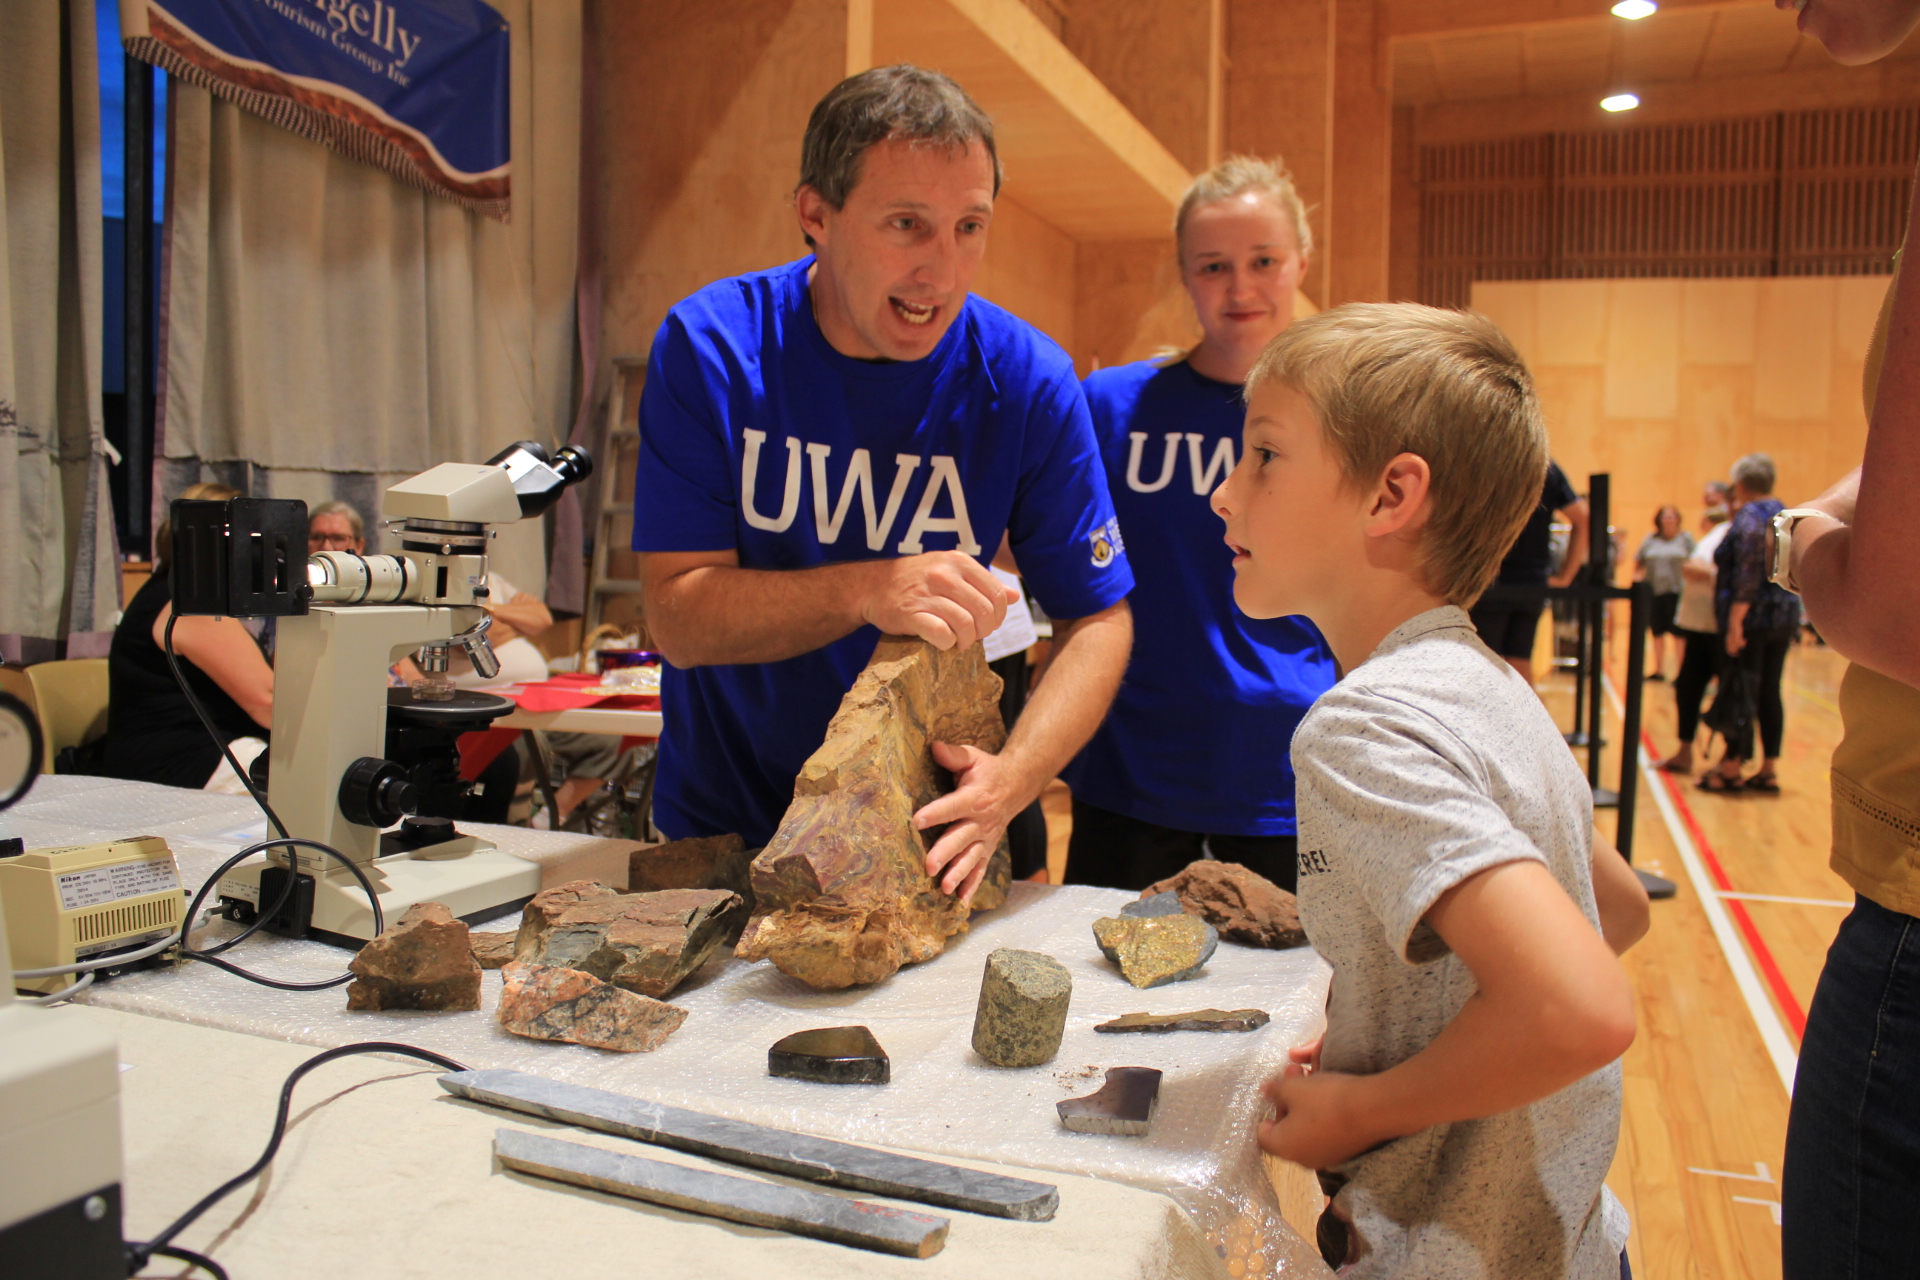 The UWA School of Agriculture and Environment attracted many visitors.